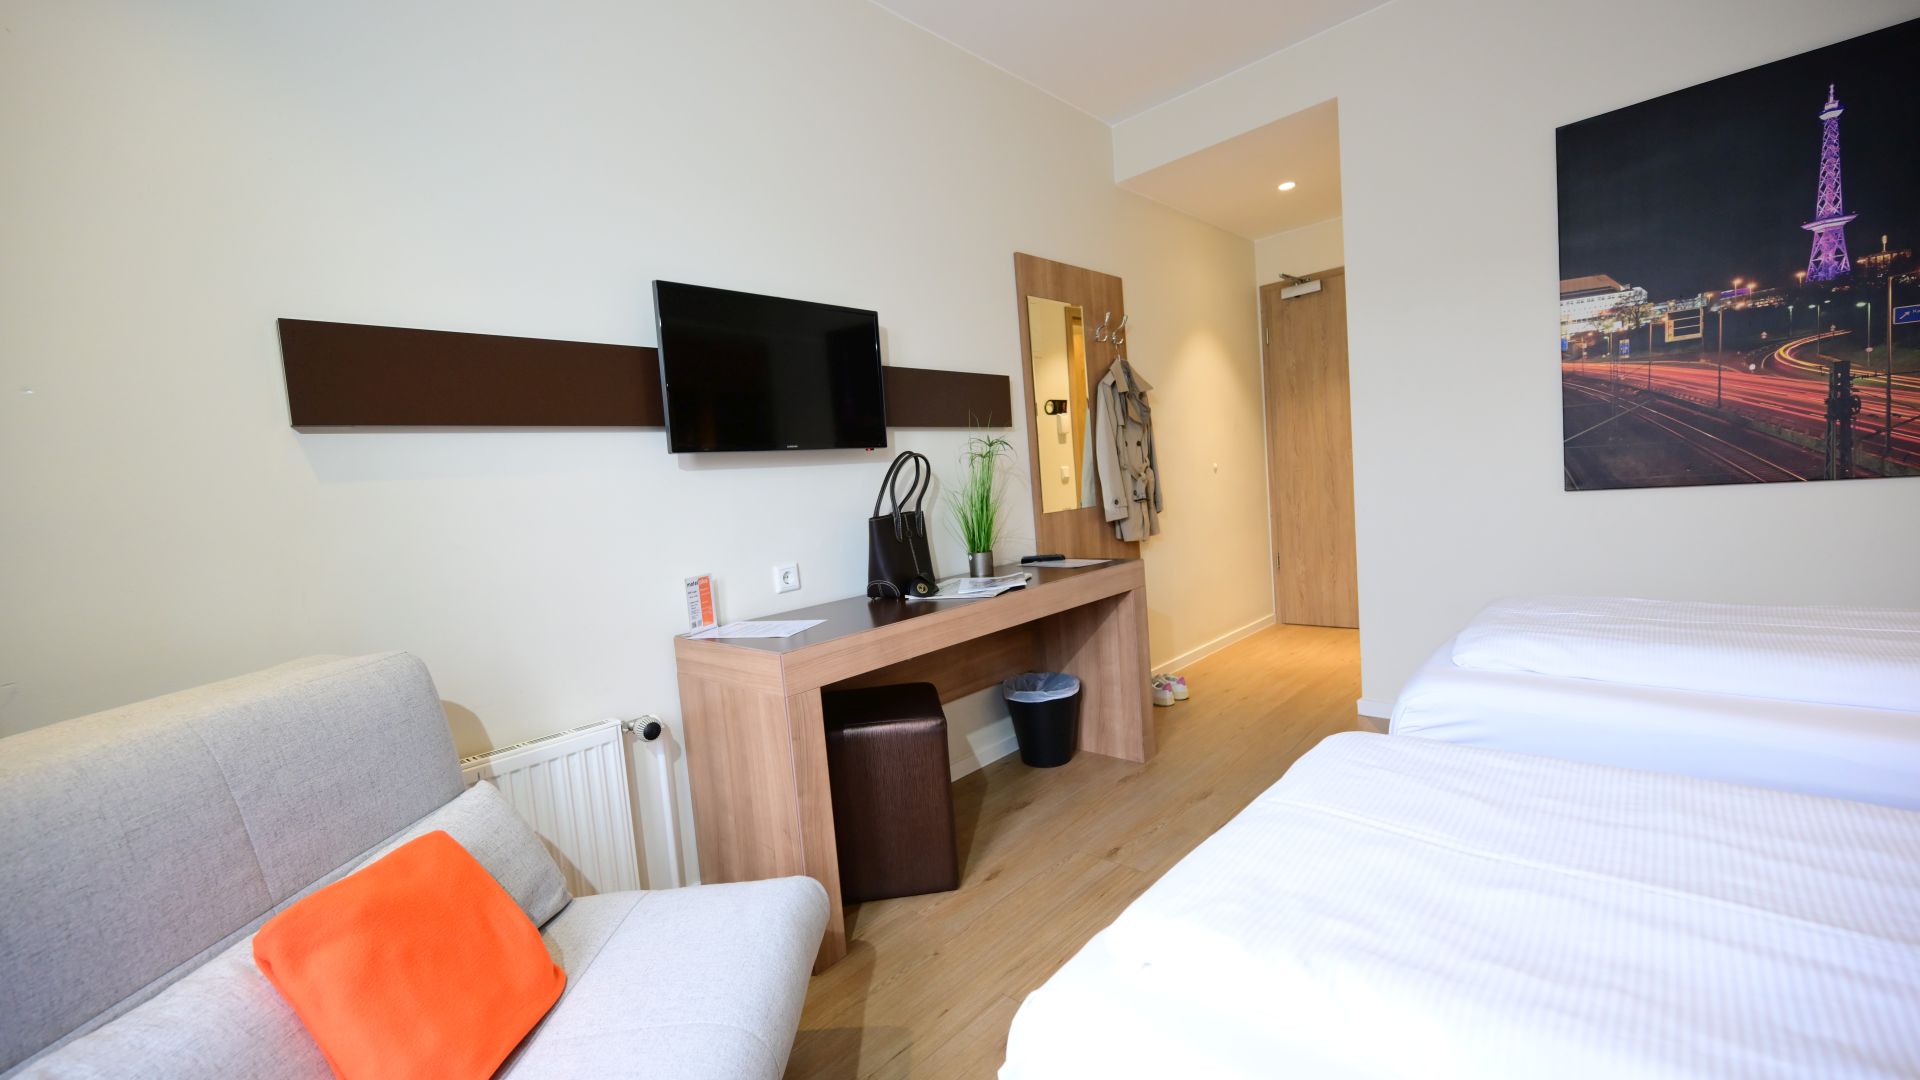 Inexpensive Hotel in Berlin: Motel Plus – Central Location & Modern Style